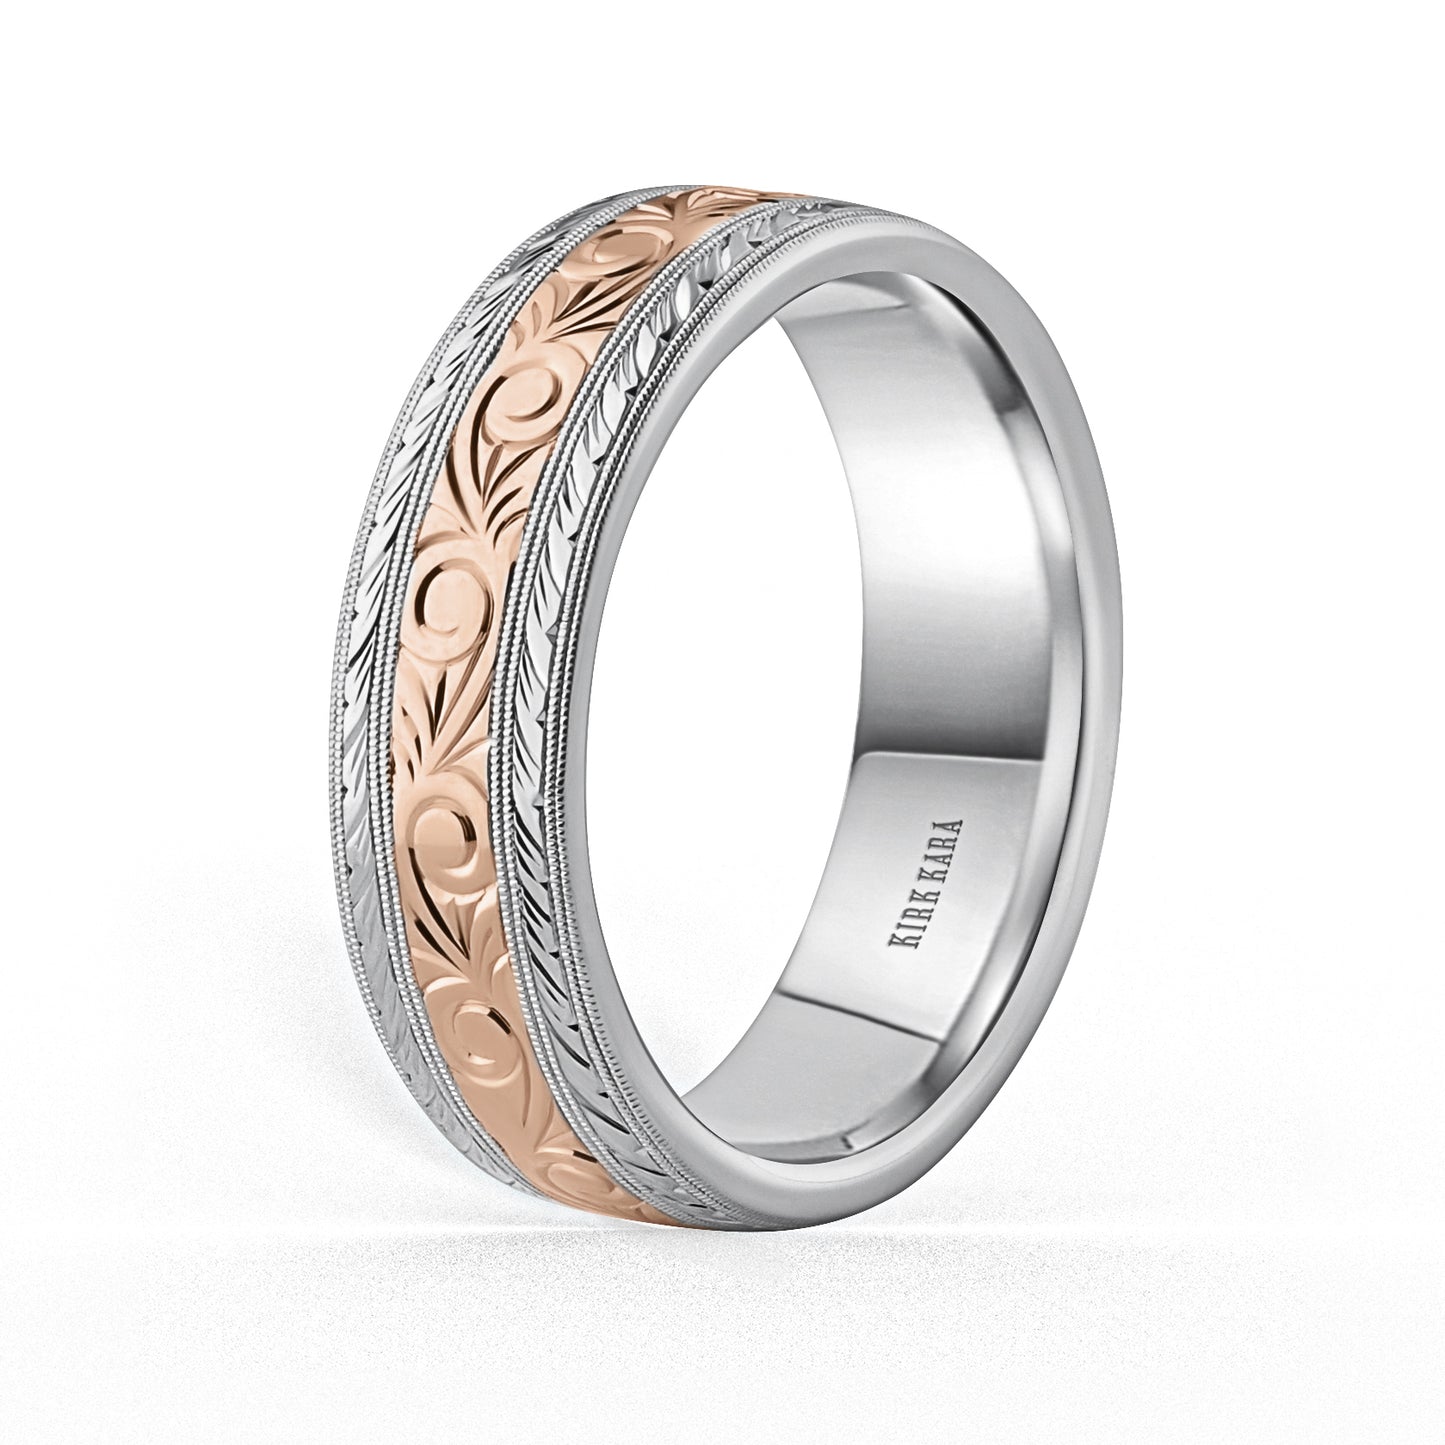 Scroll Wheat Two Tone Engraved Wedding Band, 7mm